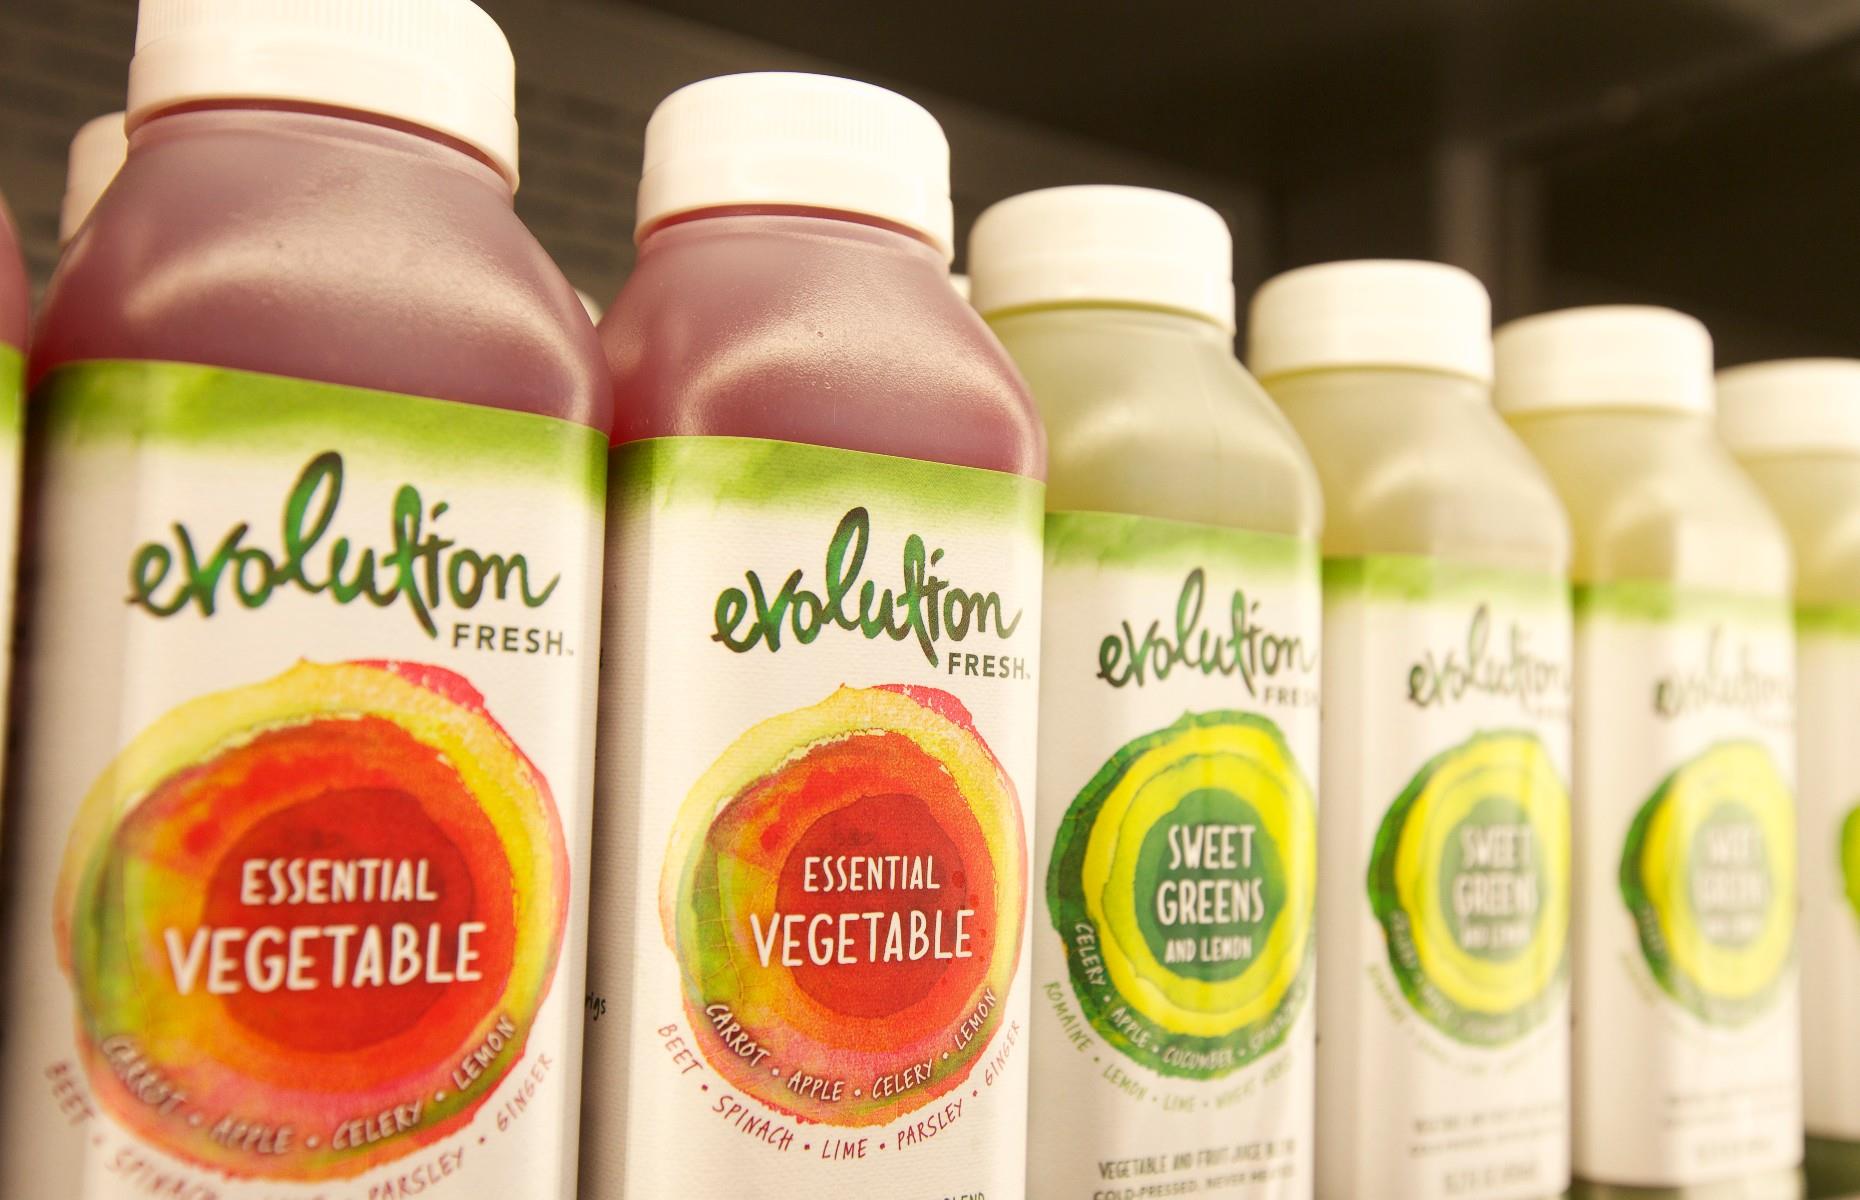 Evolution Fresh: owned by Bolthouse Farms